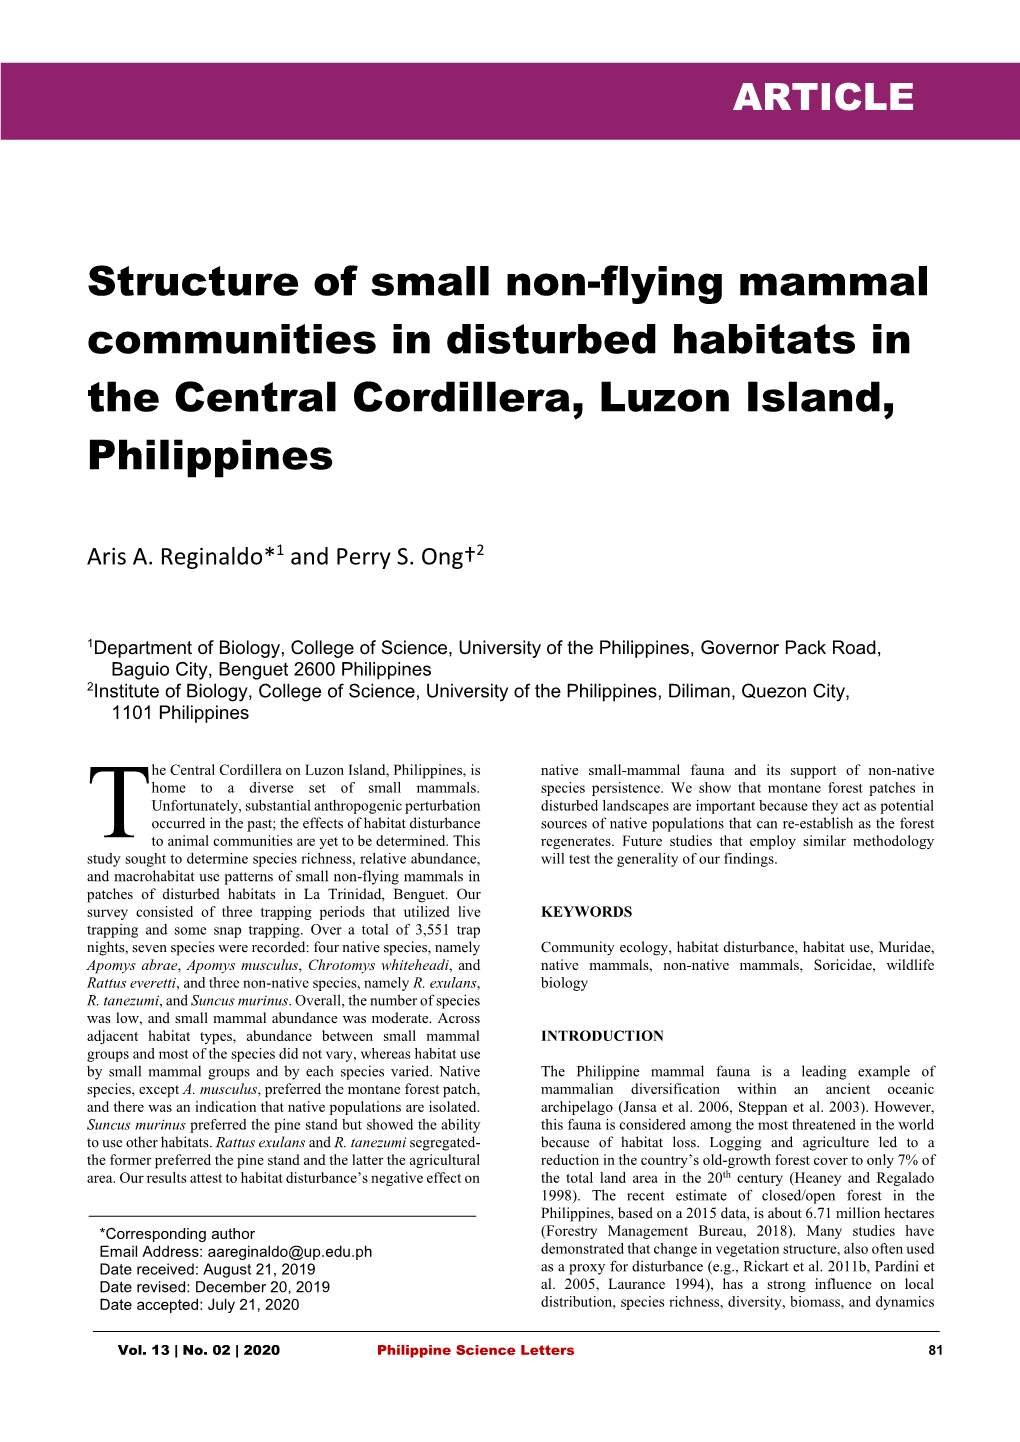 Structure of Small Non-Flying Mammal Communities in Disturbed Habitats in the Central Cordillera, Luzon Island, Philippines